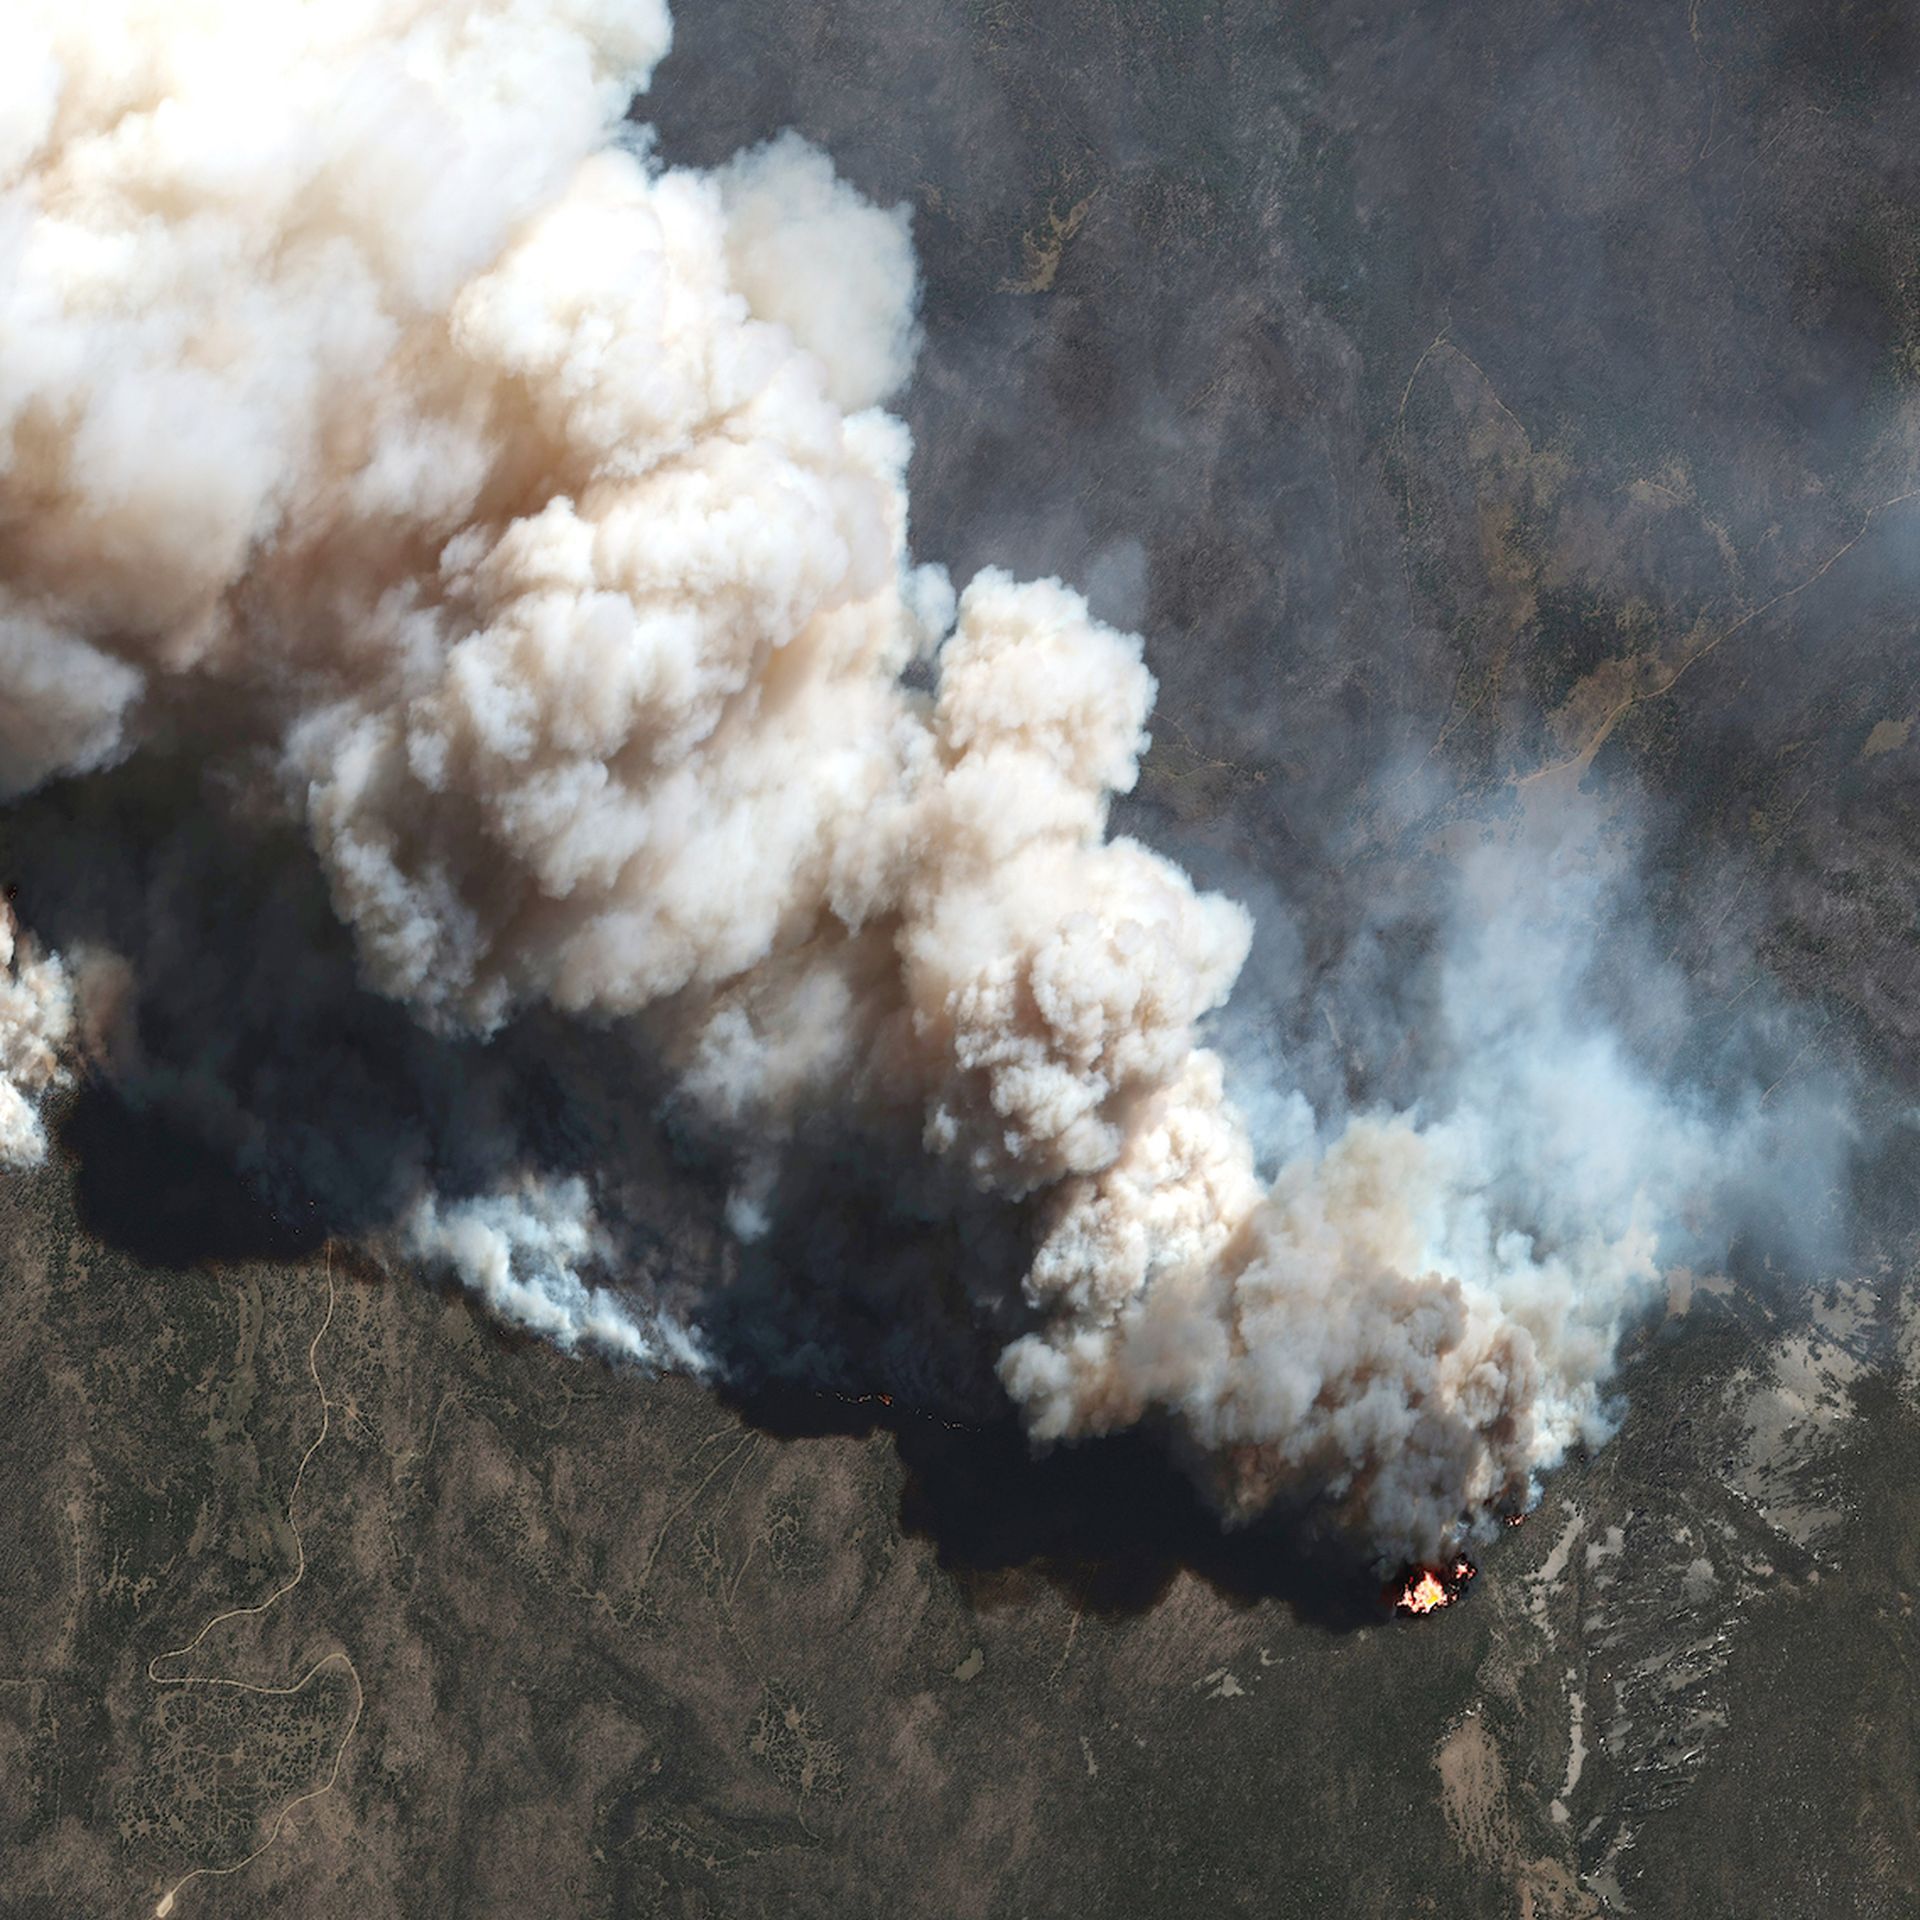 The Calf Canyon Wildfire seen from space on May 11, 2022.